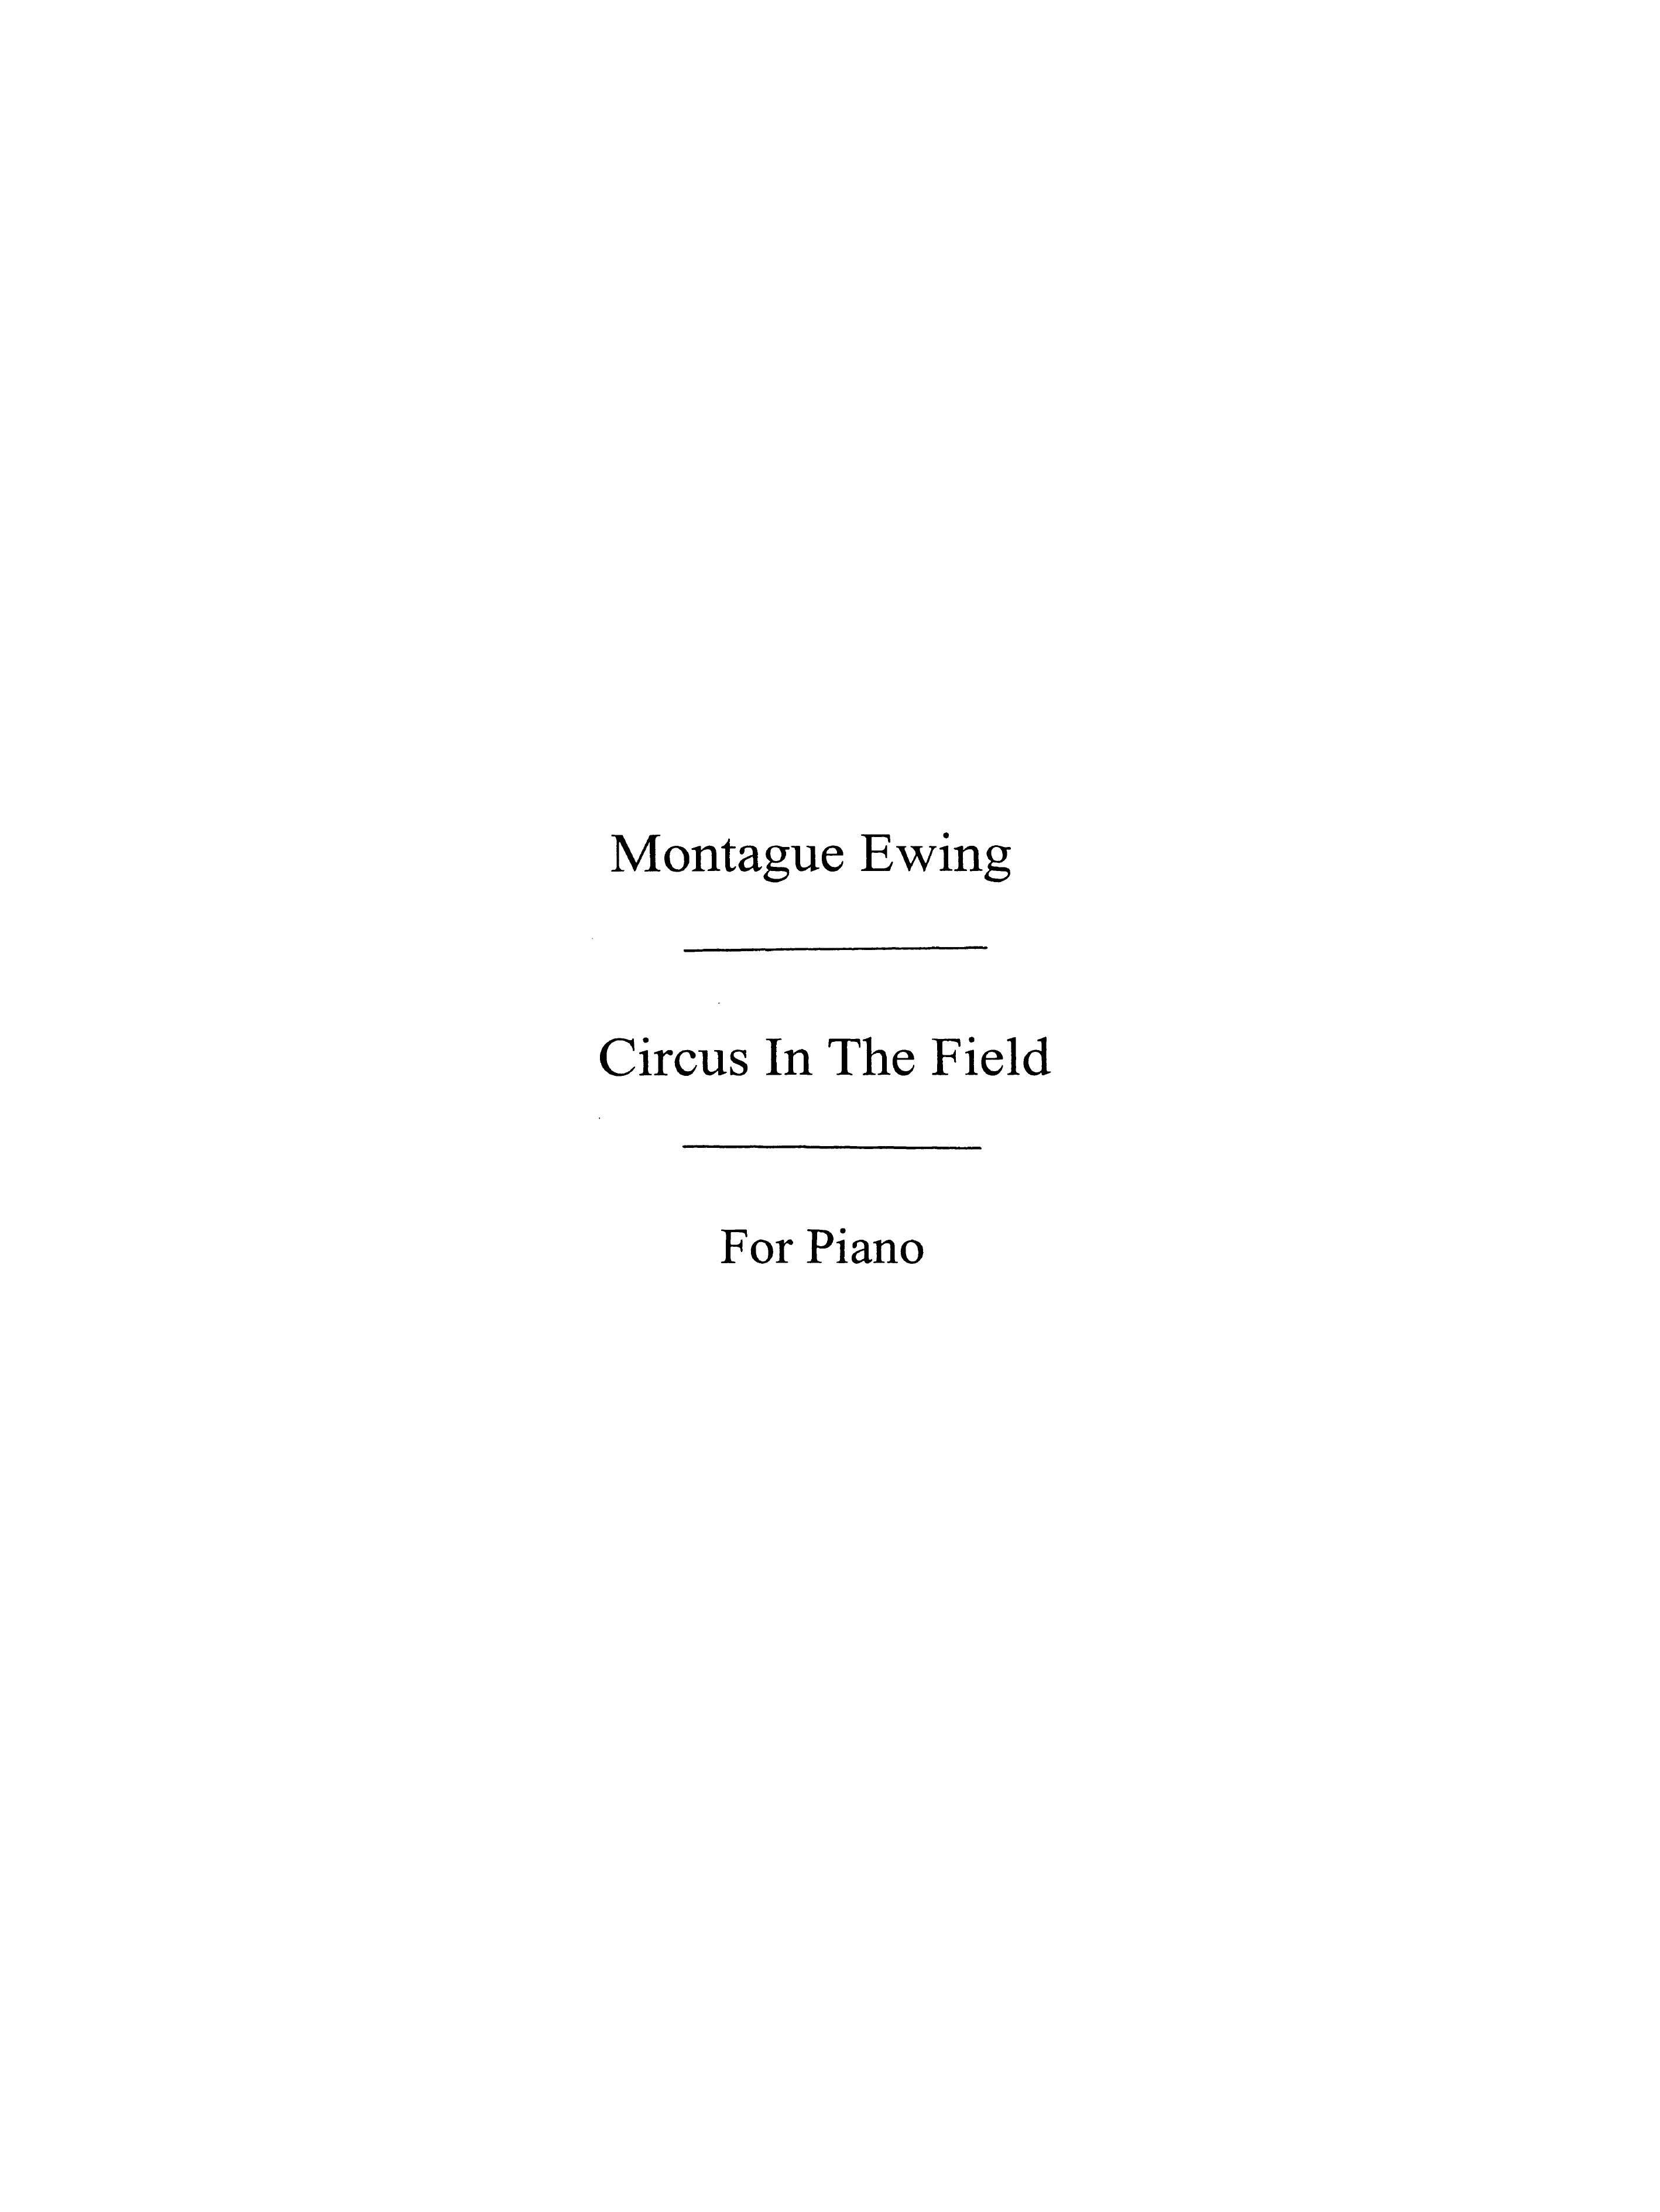 Ewing, M: Circus In The Field: Pf